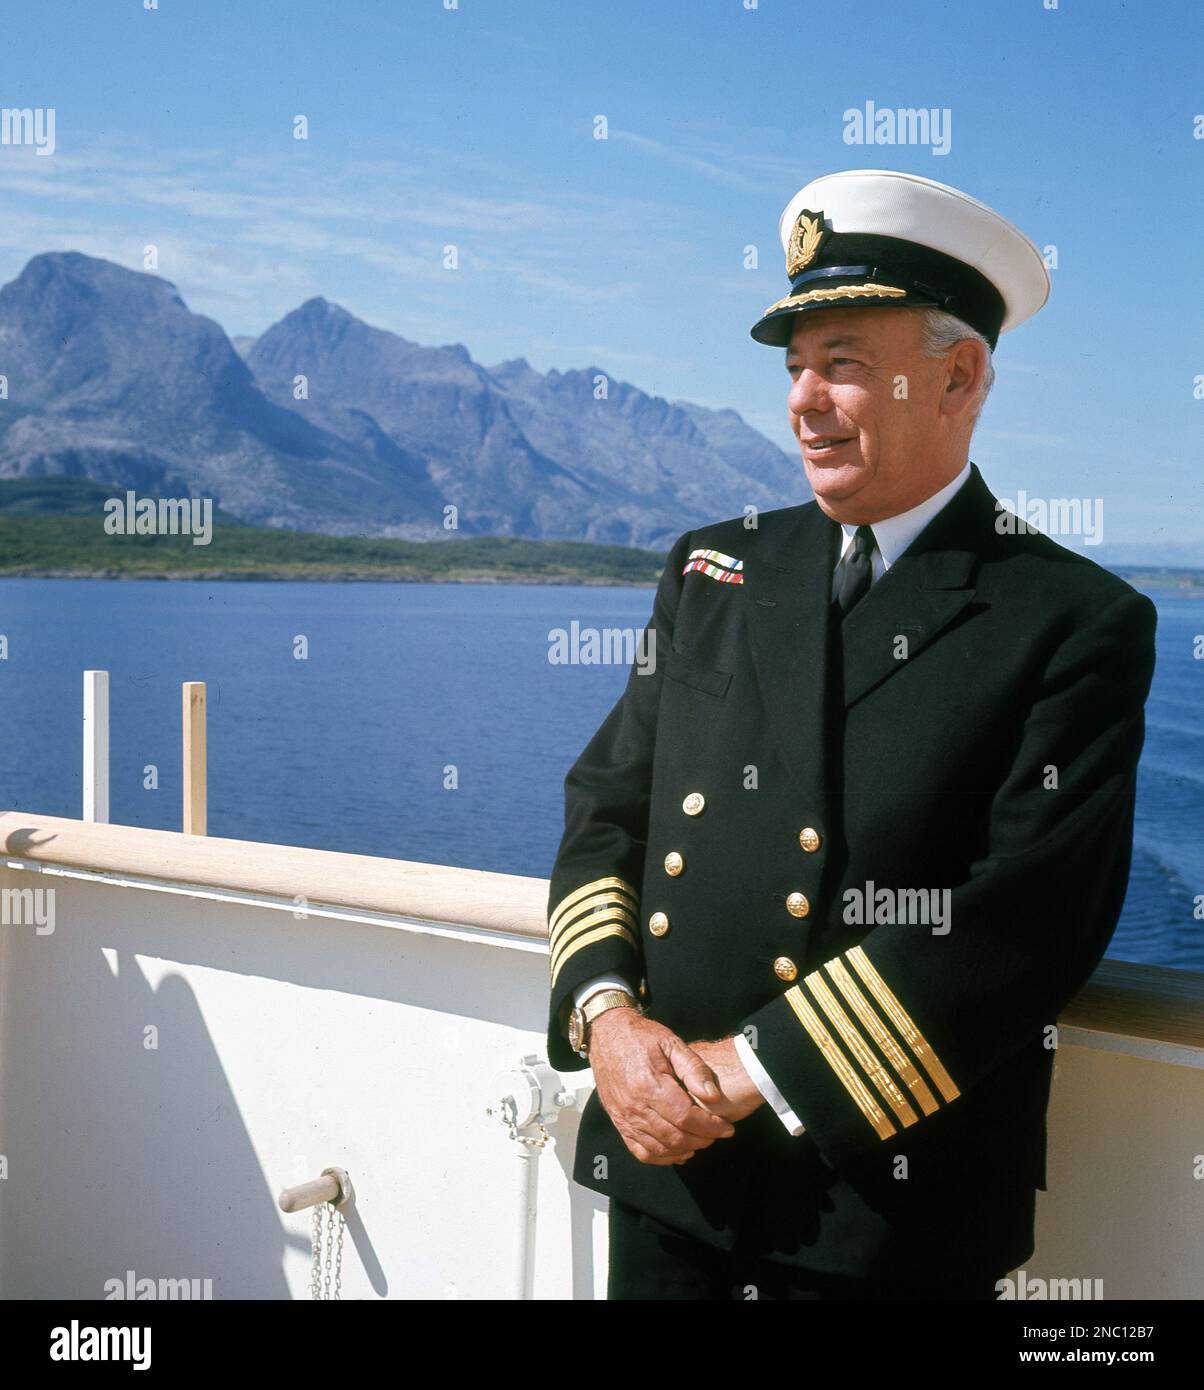 1960s, historical, portrait of the Captain (or Master) of the SS Uganda steamship outside on the deck in full uniform.  Built in 1952 for the British-India Steam Navigation Company as a passenger and cargo liner, she sailed between London and East Africa.  The rise in civil aviation, saw a decline in demand and so she was converted to an educational cruise ship in the late 1960s, when her cargo holds were changed into dormitory cabins. She then sailed in Scandinavia and the Mediterranean up until 1982, when she was used by the Royal Navy as a hospital ship in the Falklands War. Stock Photo